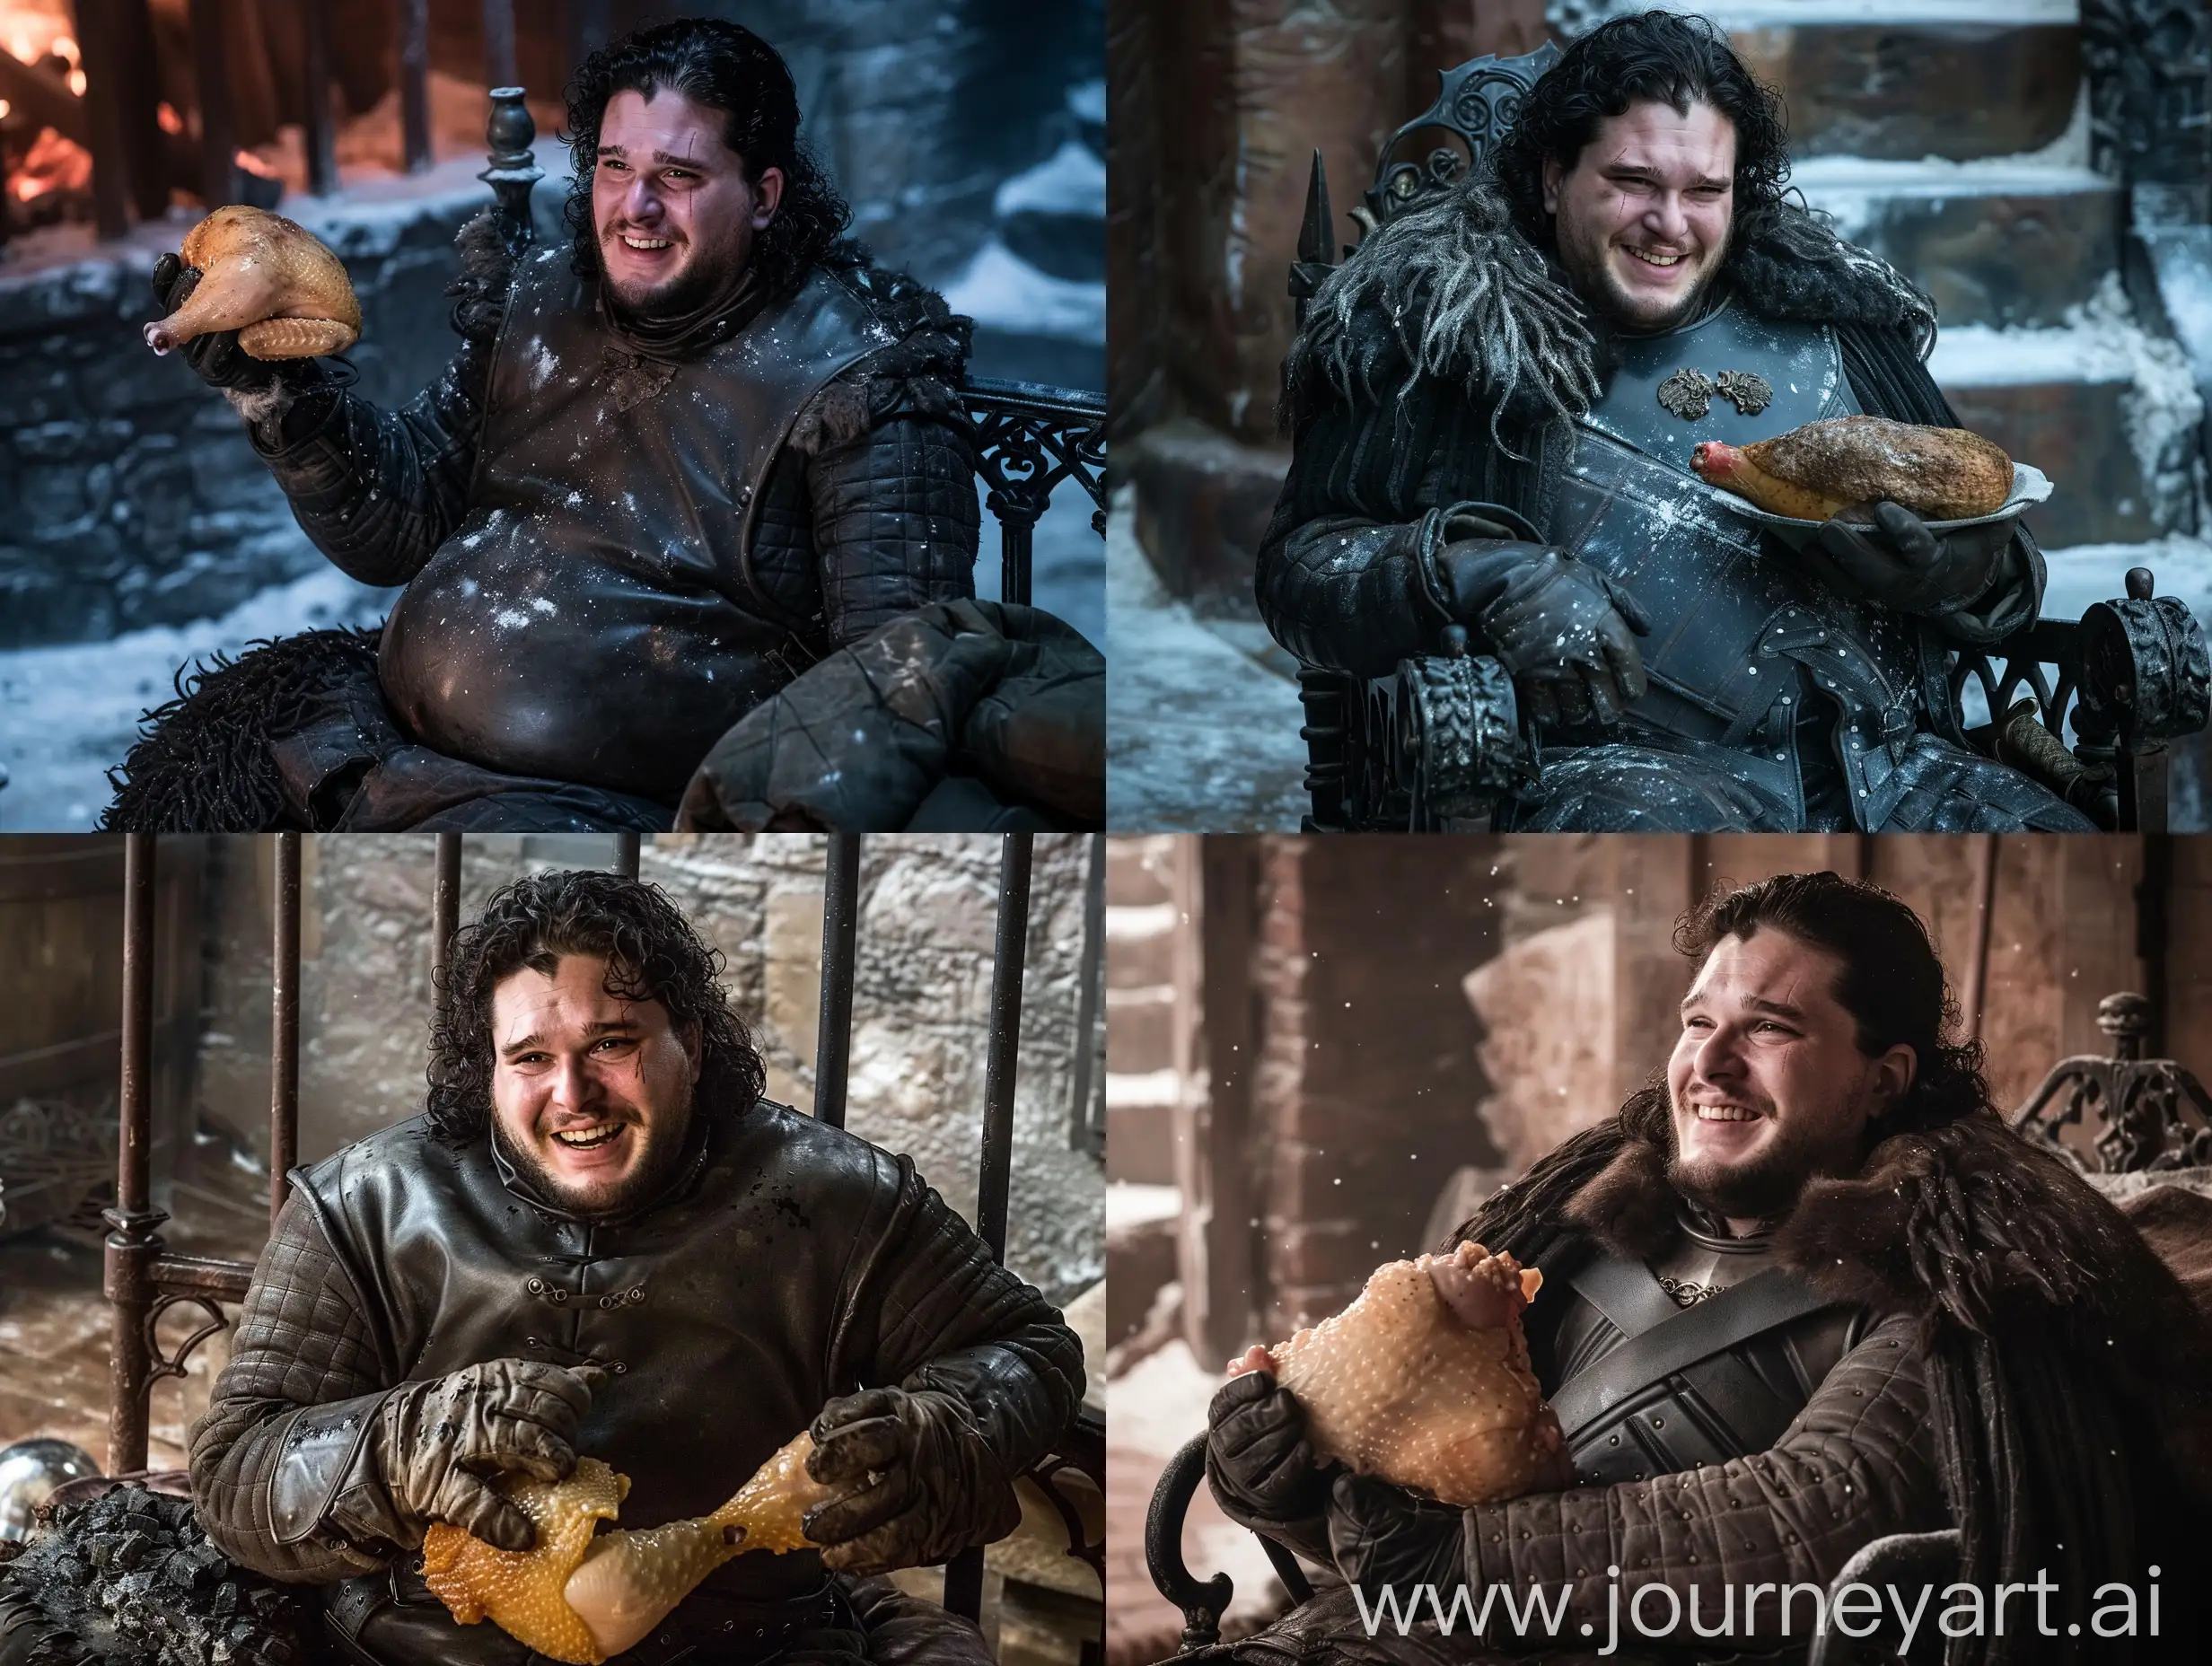 Jon Snow in the Game of Thrones series, Jon Snow is fat and has a face and body He is very fat, Jon Snow is sitting on the iron bed with the same face and very fat body, he has a chicken leg that he is holding in his right hand, it is chicken pie ready to eat, Jon Snow is in Winterfell, it is winter season, Jon Snow is looking at the camera looks on, Jon Snow grins, classic lighting, q2